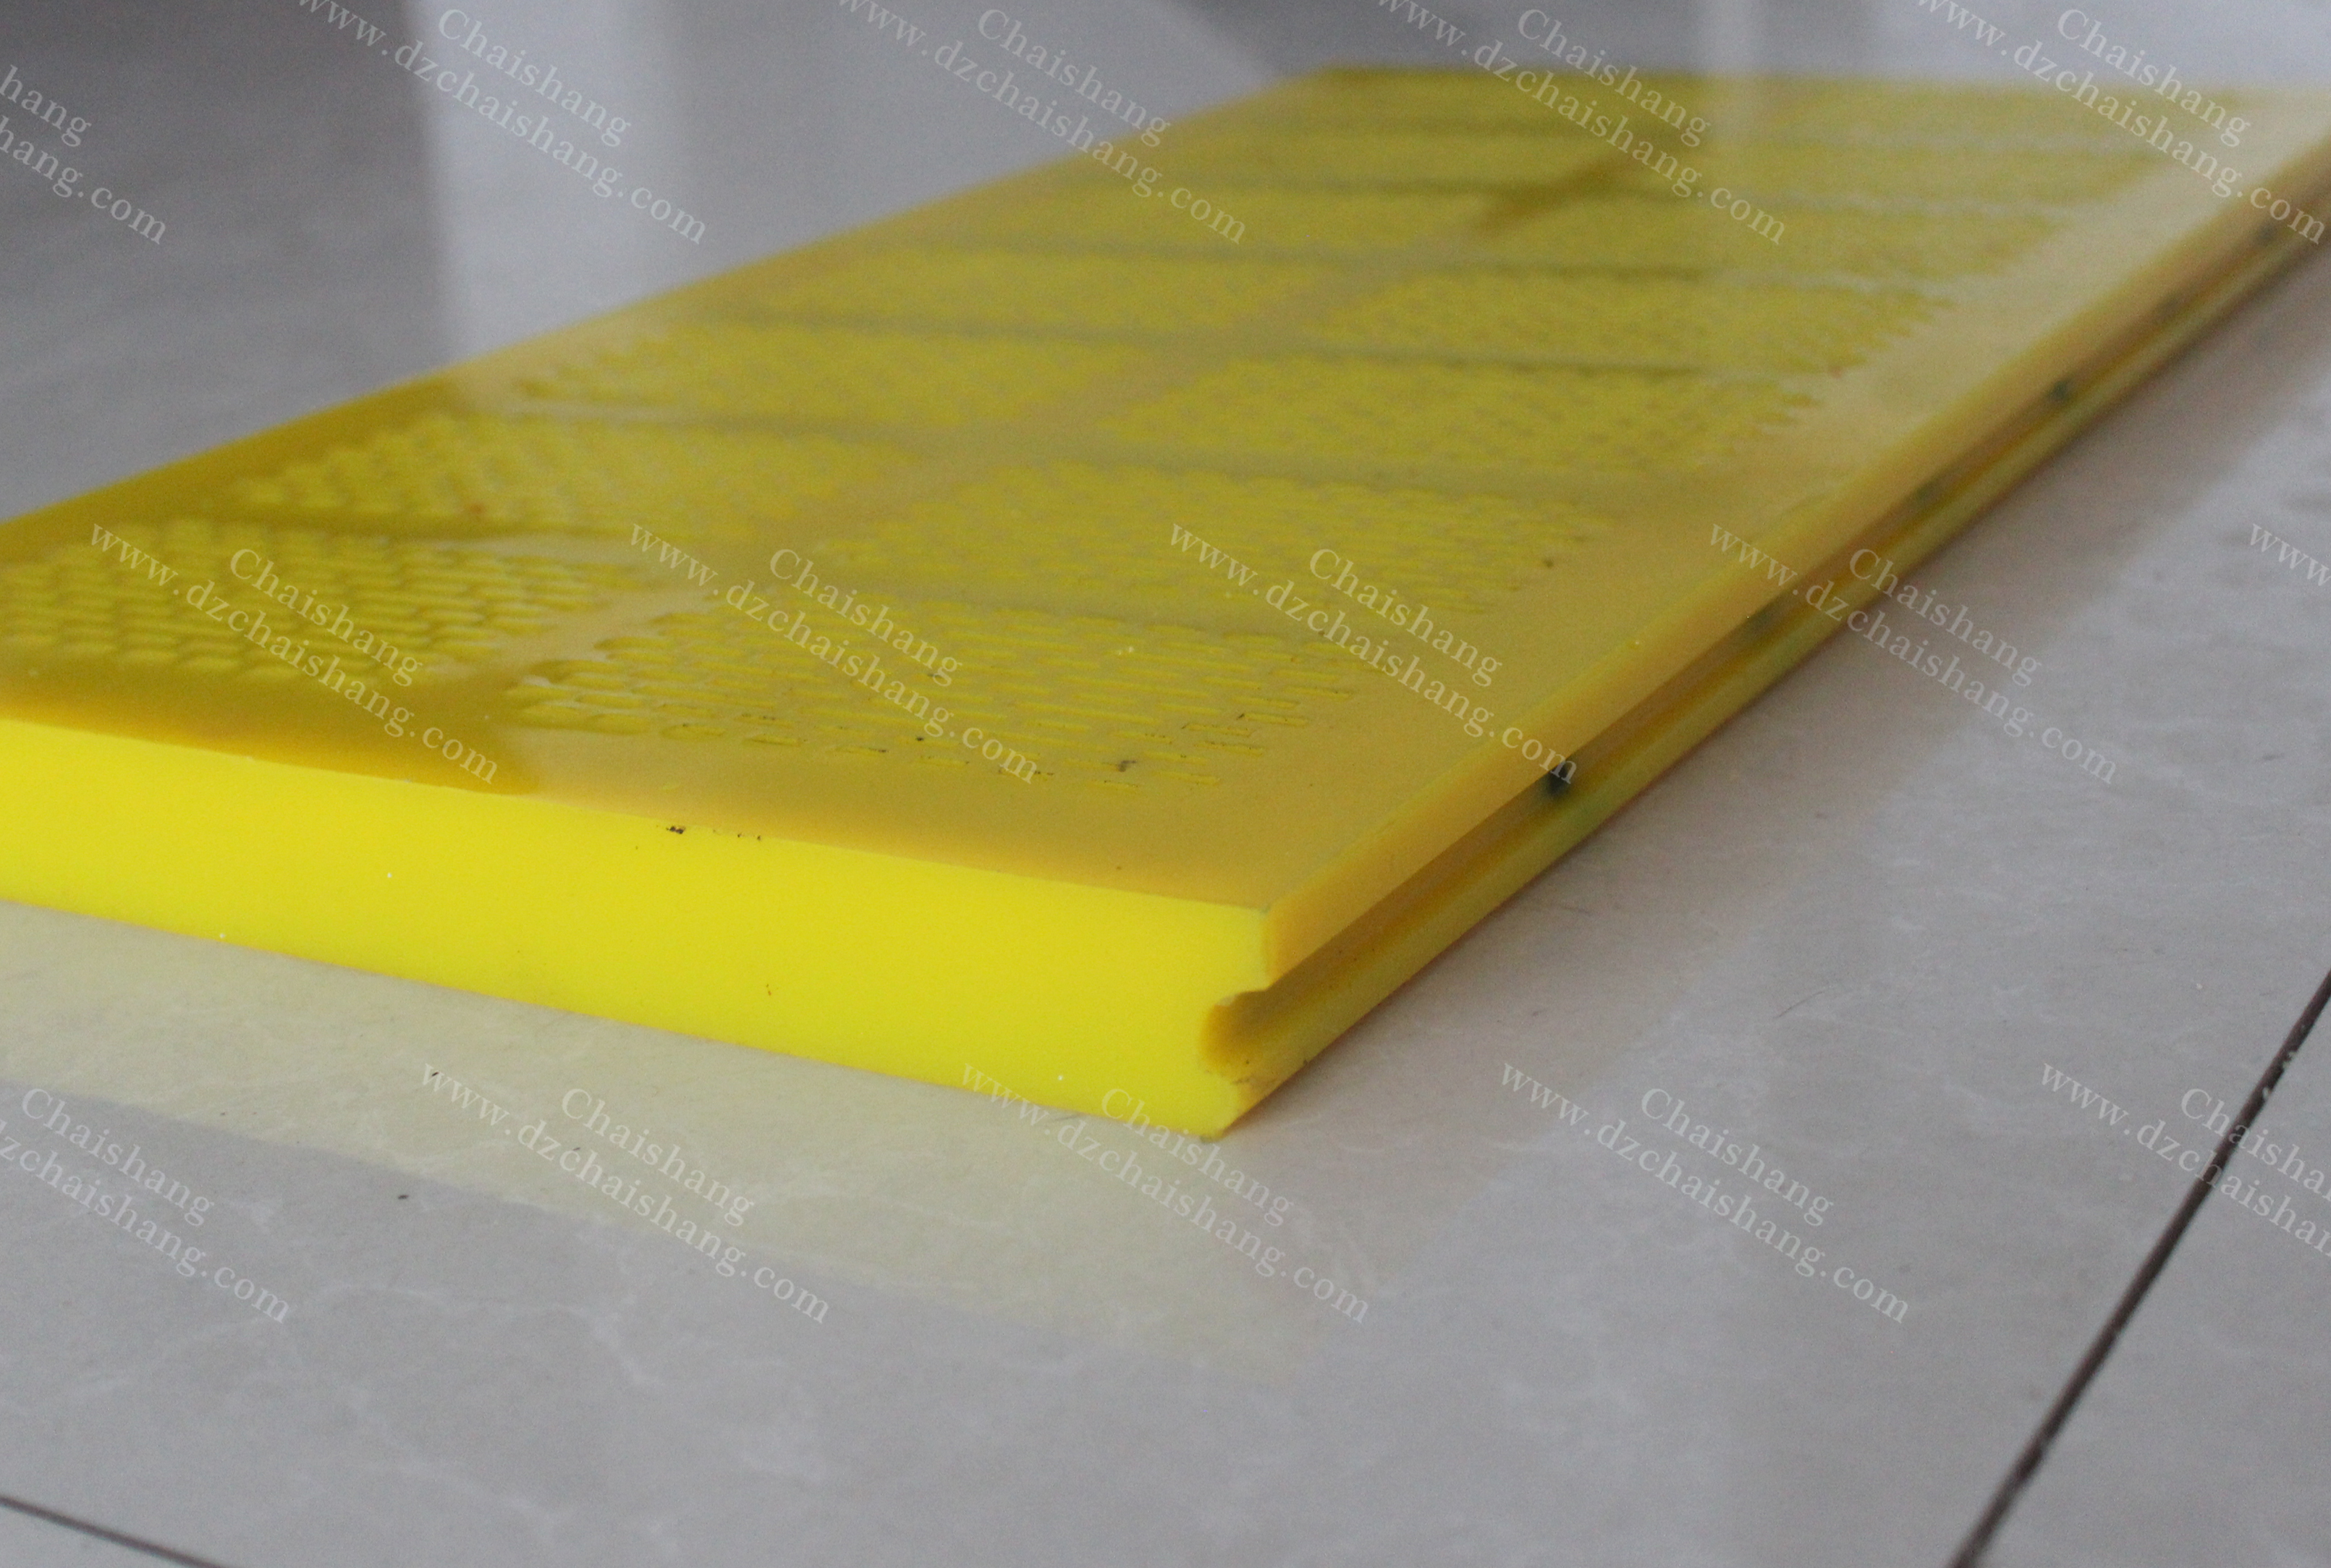 polyurethane screen for vibrating screens,Polyurethane screen panels,crusher sieve,factory,price-CHAISHANG | Polyurethane Screen,Rubber Screen Panels,Polyweb Screen,Belt Cleaner,Flotion Cell